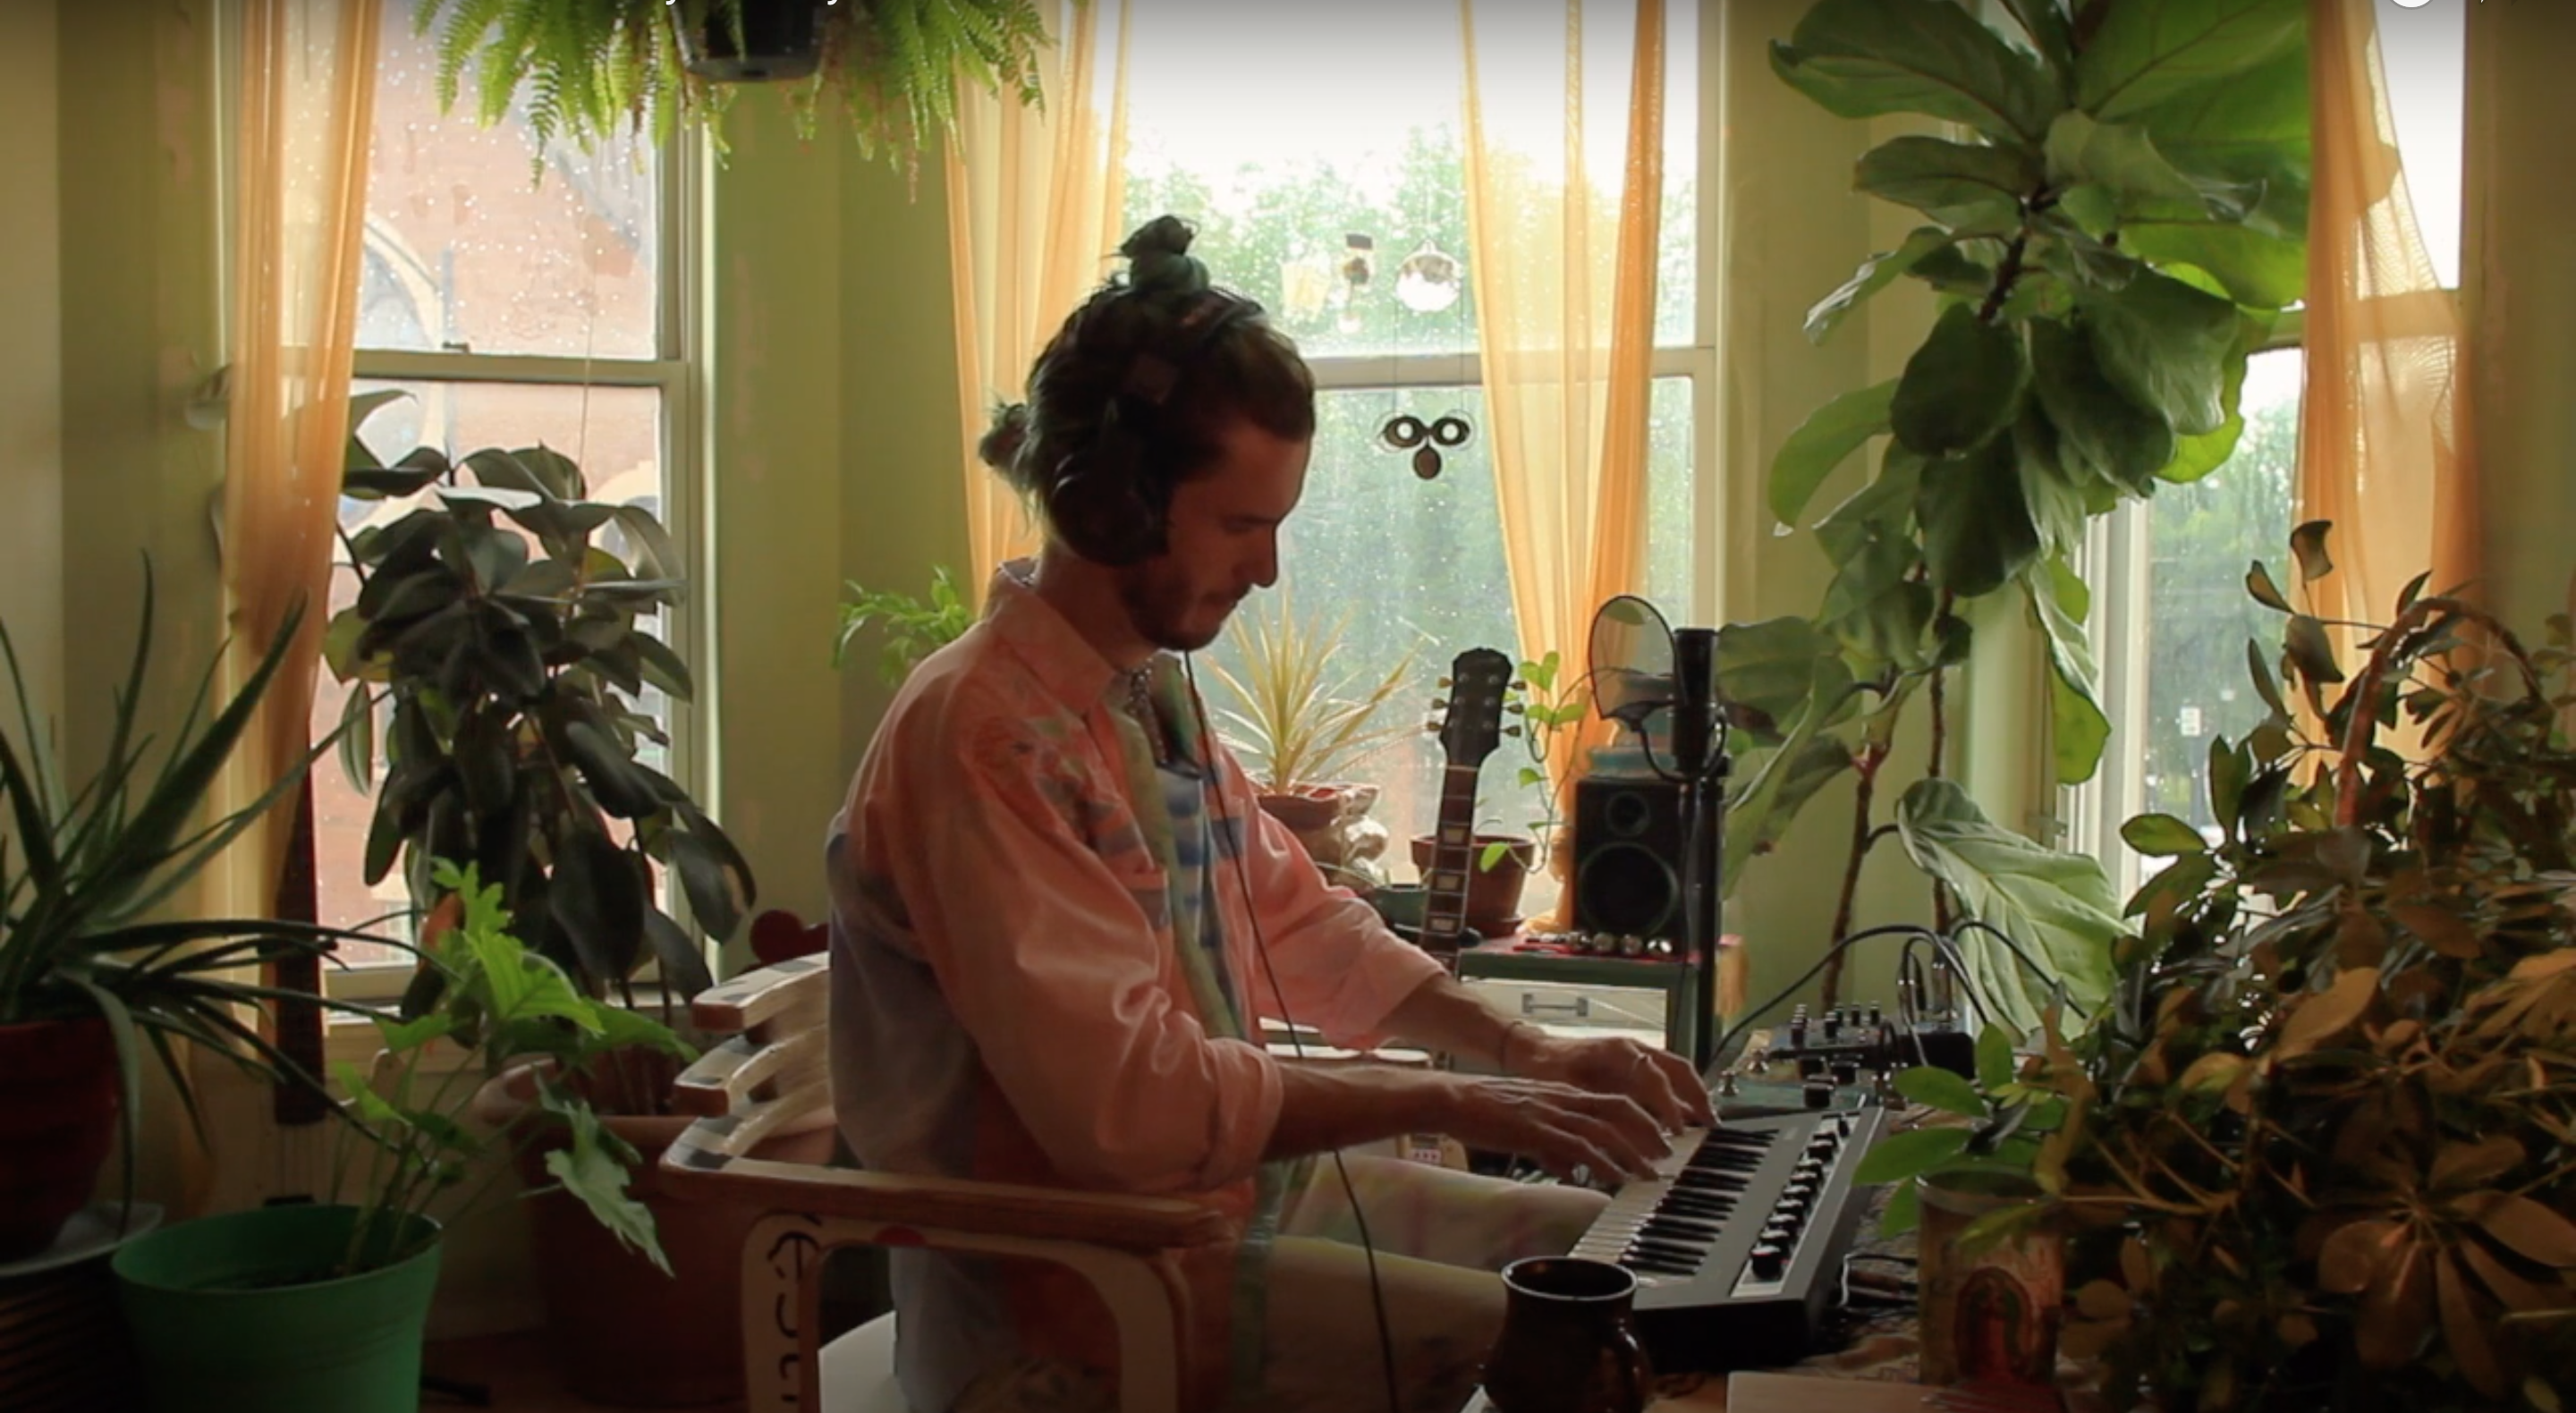 Jeffrey Michael Austin in their home studio performing A Place You Can Go. They are playing a keyboard and seated in front of three windows which are illuminating the room with natural light. The space around Jeffrey is filled with different types of houseplants.